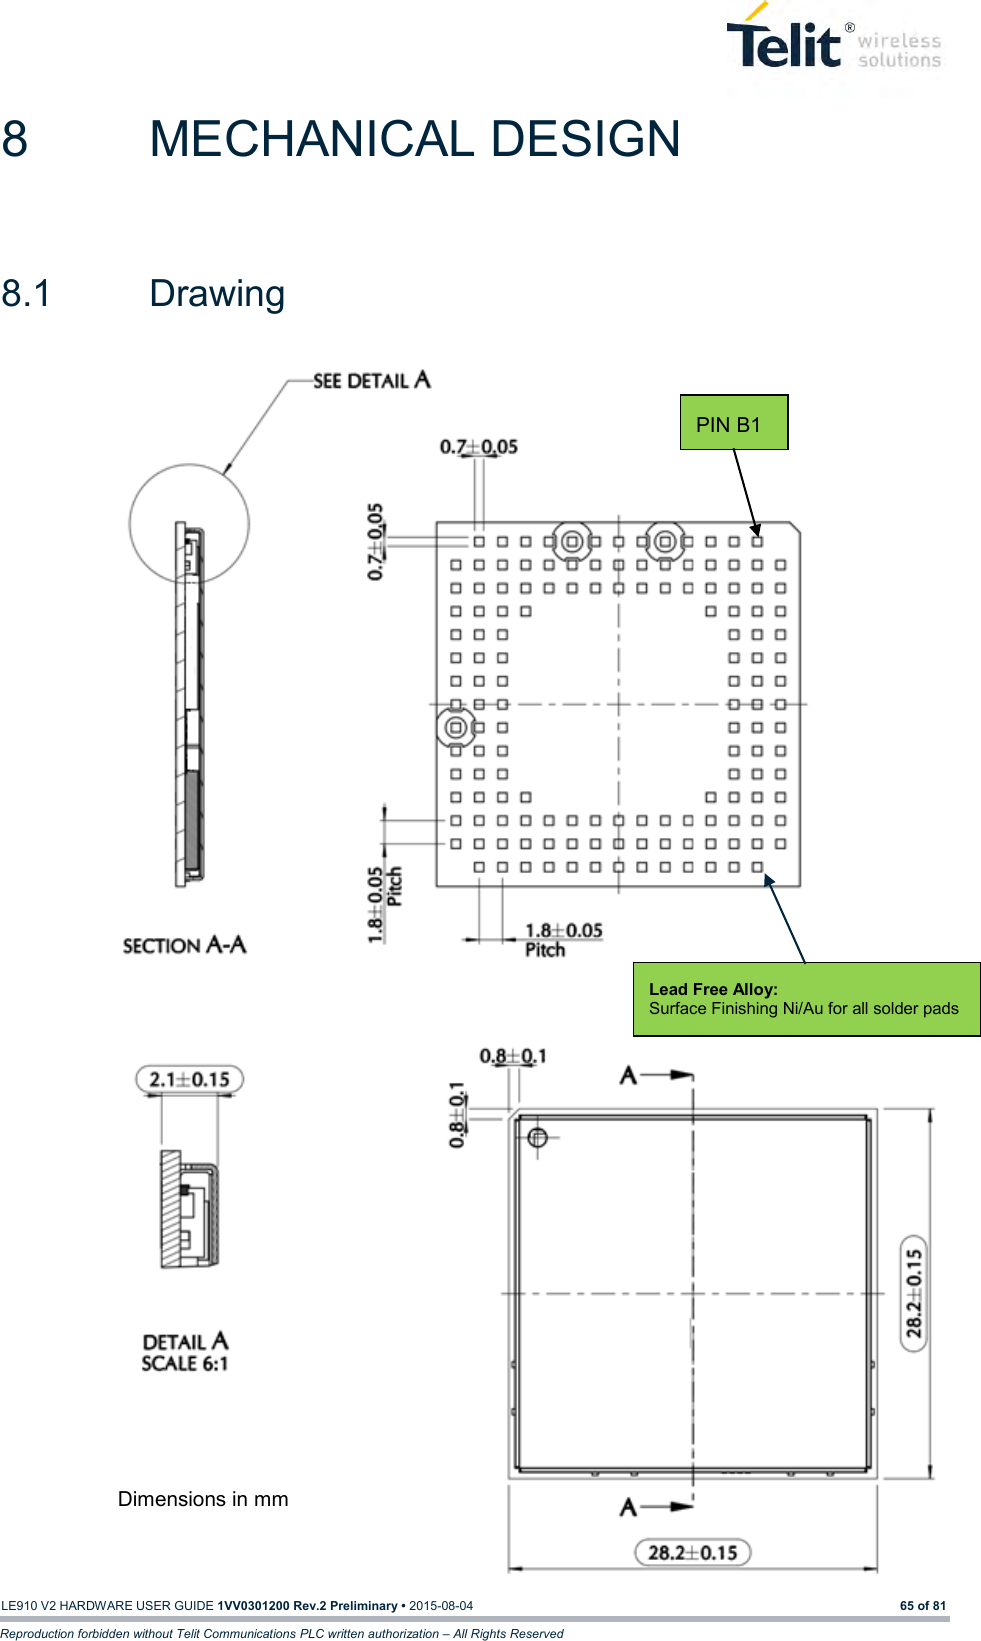   LE910 V2 HARDWARE USER GUIDE 1VV0301200 Rev.2 Preliminary • 2015-08-04 65 of 81 Reproduction forbidden without Telit Communications PLC written authorization – All Rights Reserved 8  MECHANICAL DESIGN 8.1  Drawing  Dimensions in mm PIN B1 Lead Free Alloy: Surface Finishing Ni/Au for all solder pads 